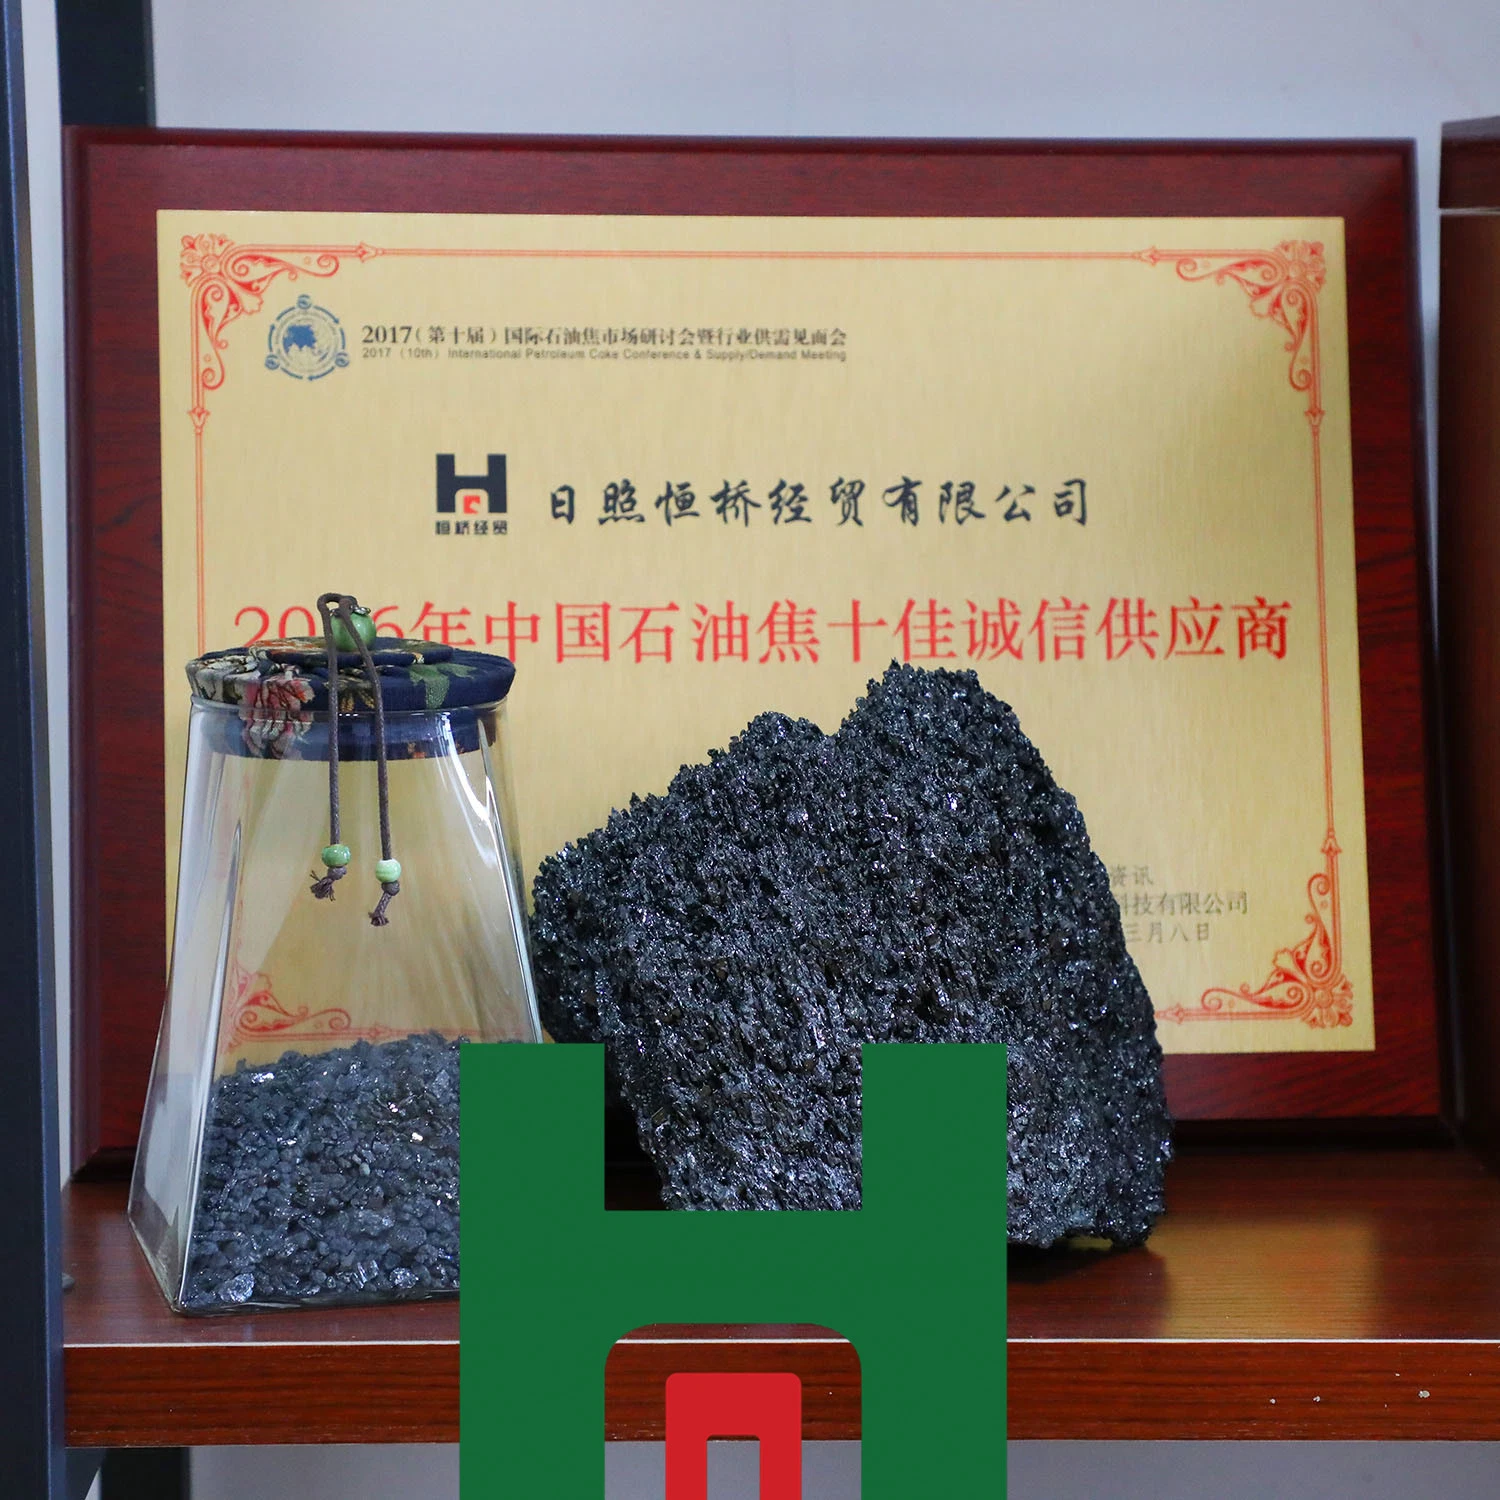 90% Sic Size 0-10mm Black Silicon Carbide Used for Steel Making and Foundry Factory